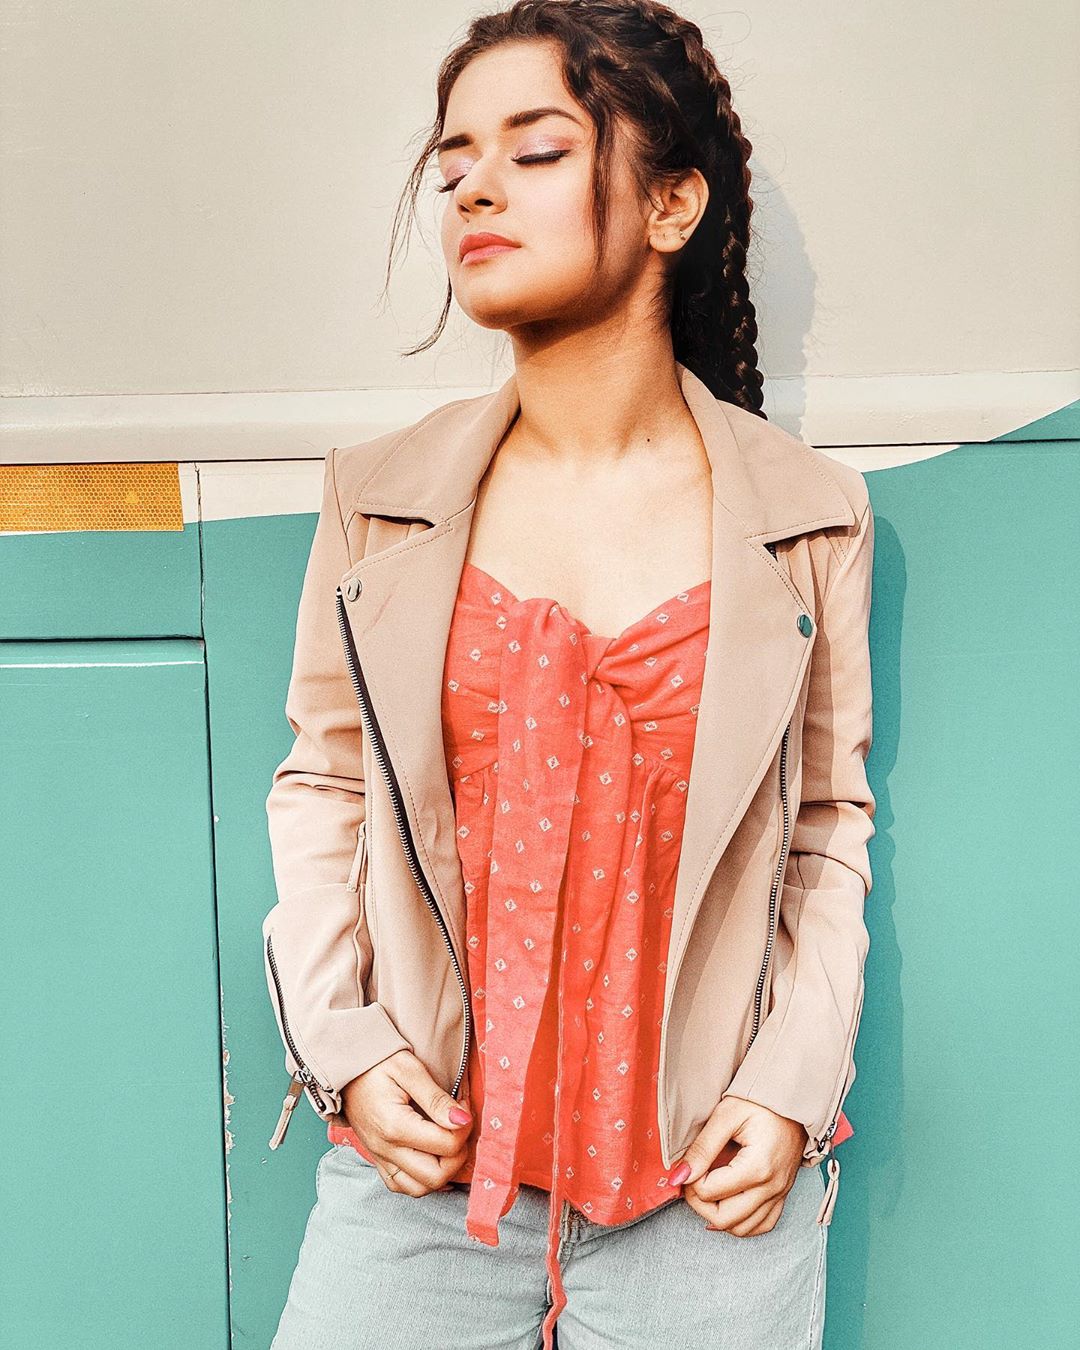 Avneet Kaur Wallpapers, Photos, Images & Pictures I have absolutely no desire to be average.
What do you like wearing more?
Formals or casuals??